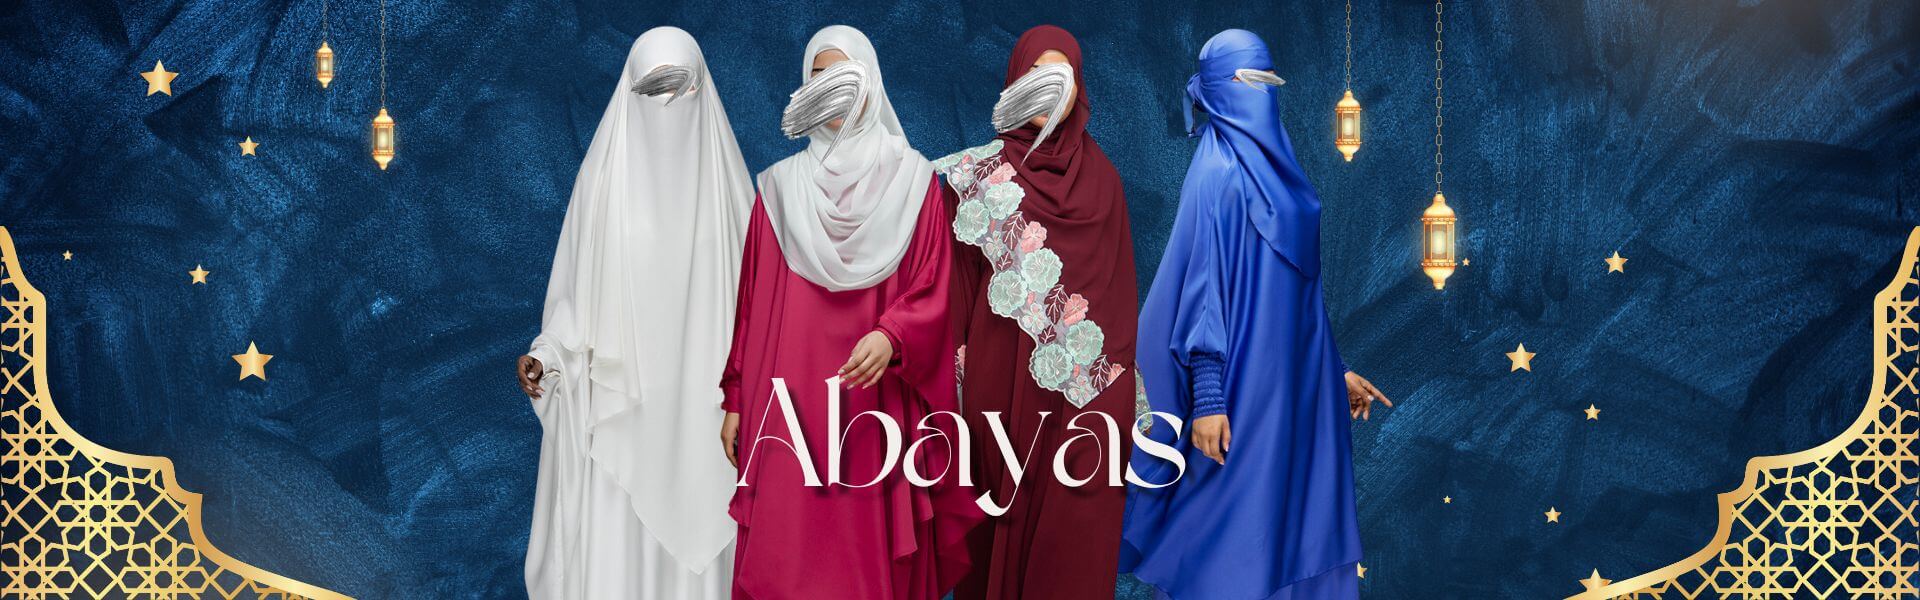 Abayas Collection